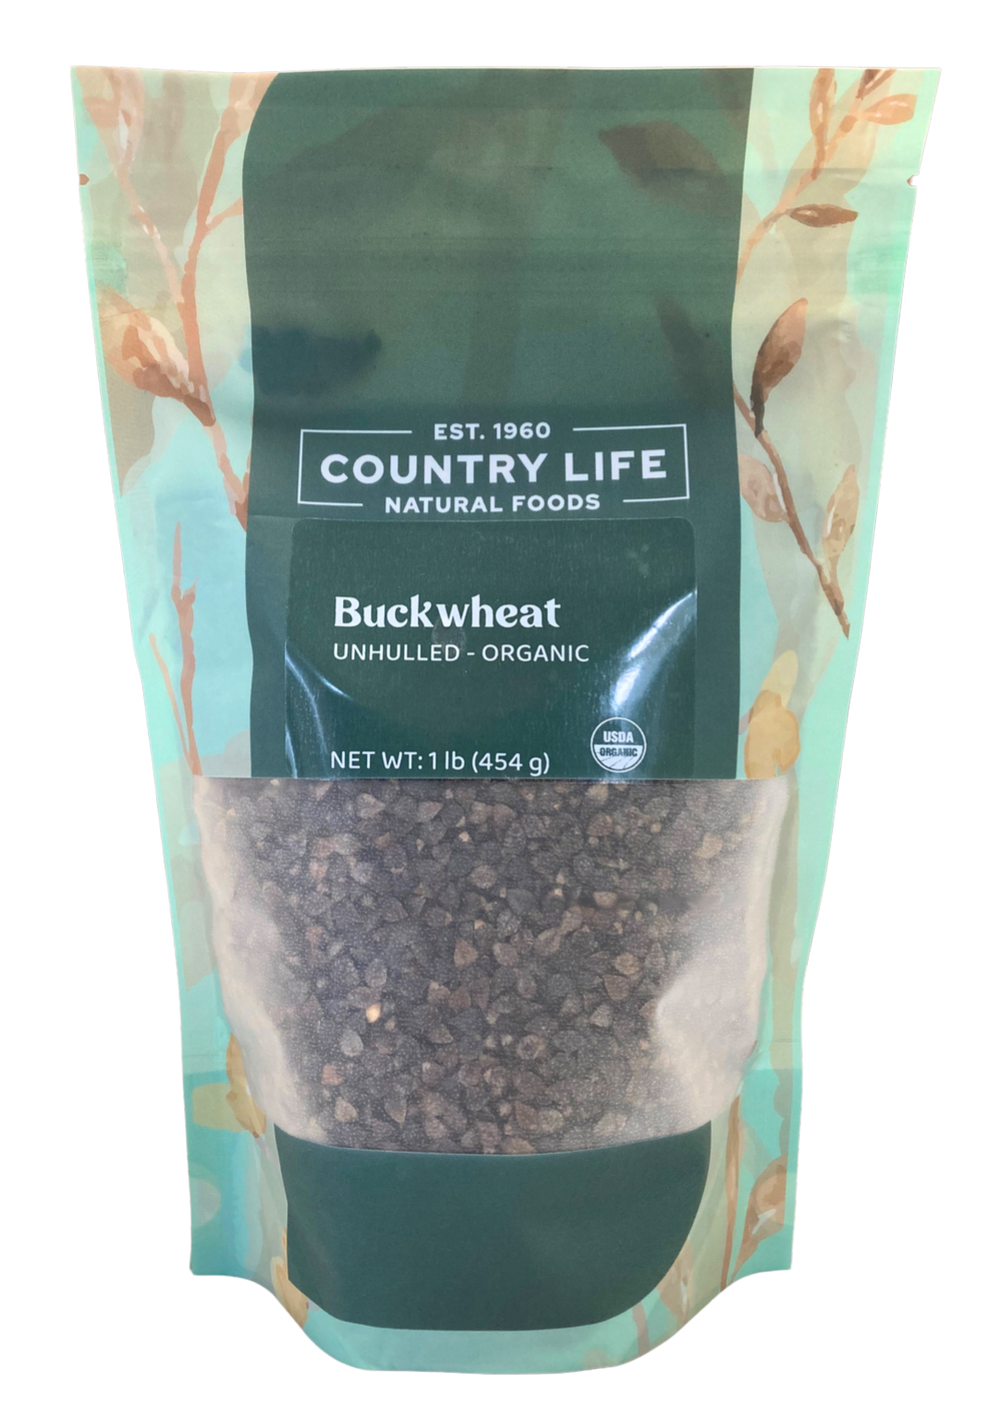 Organic Buckwheat, Unhulled (For Sprouting) - Country Life Natural Foods